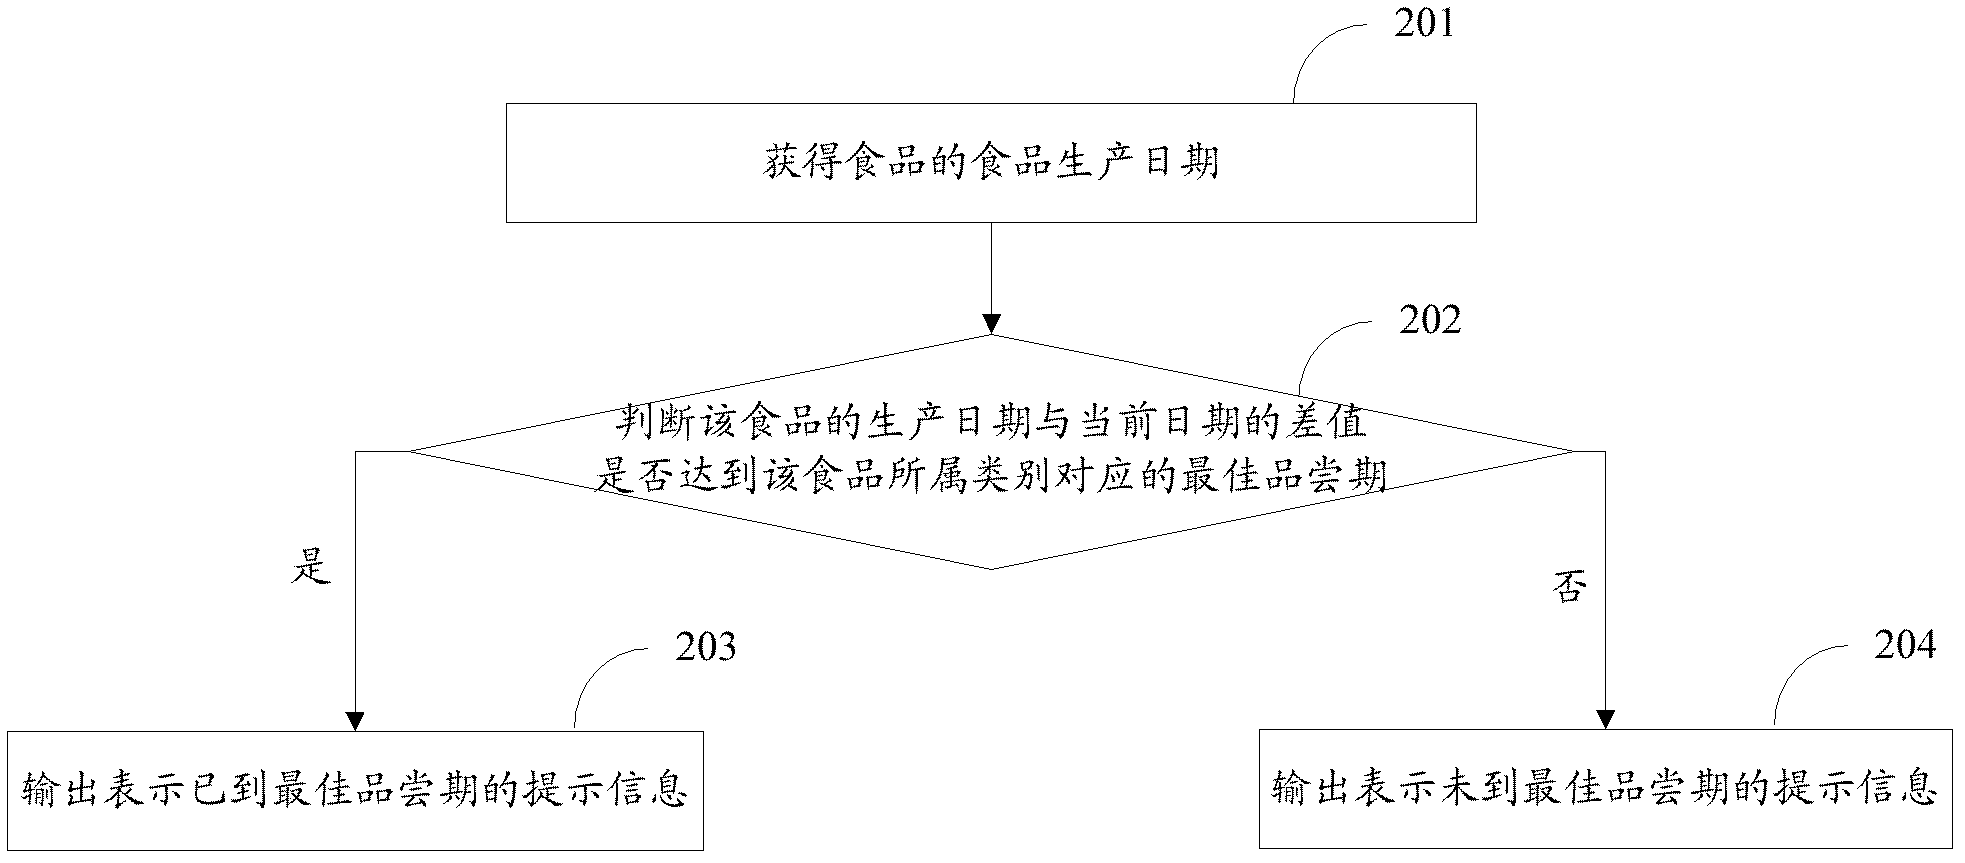 Method and device for monitoring food information